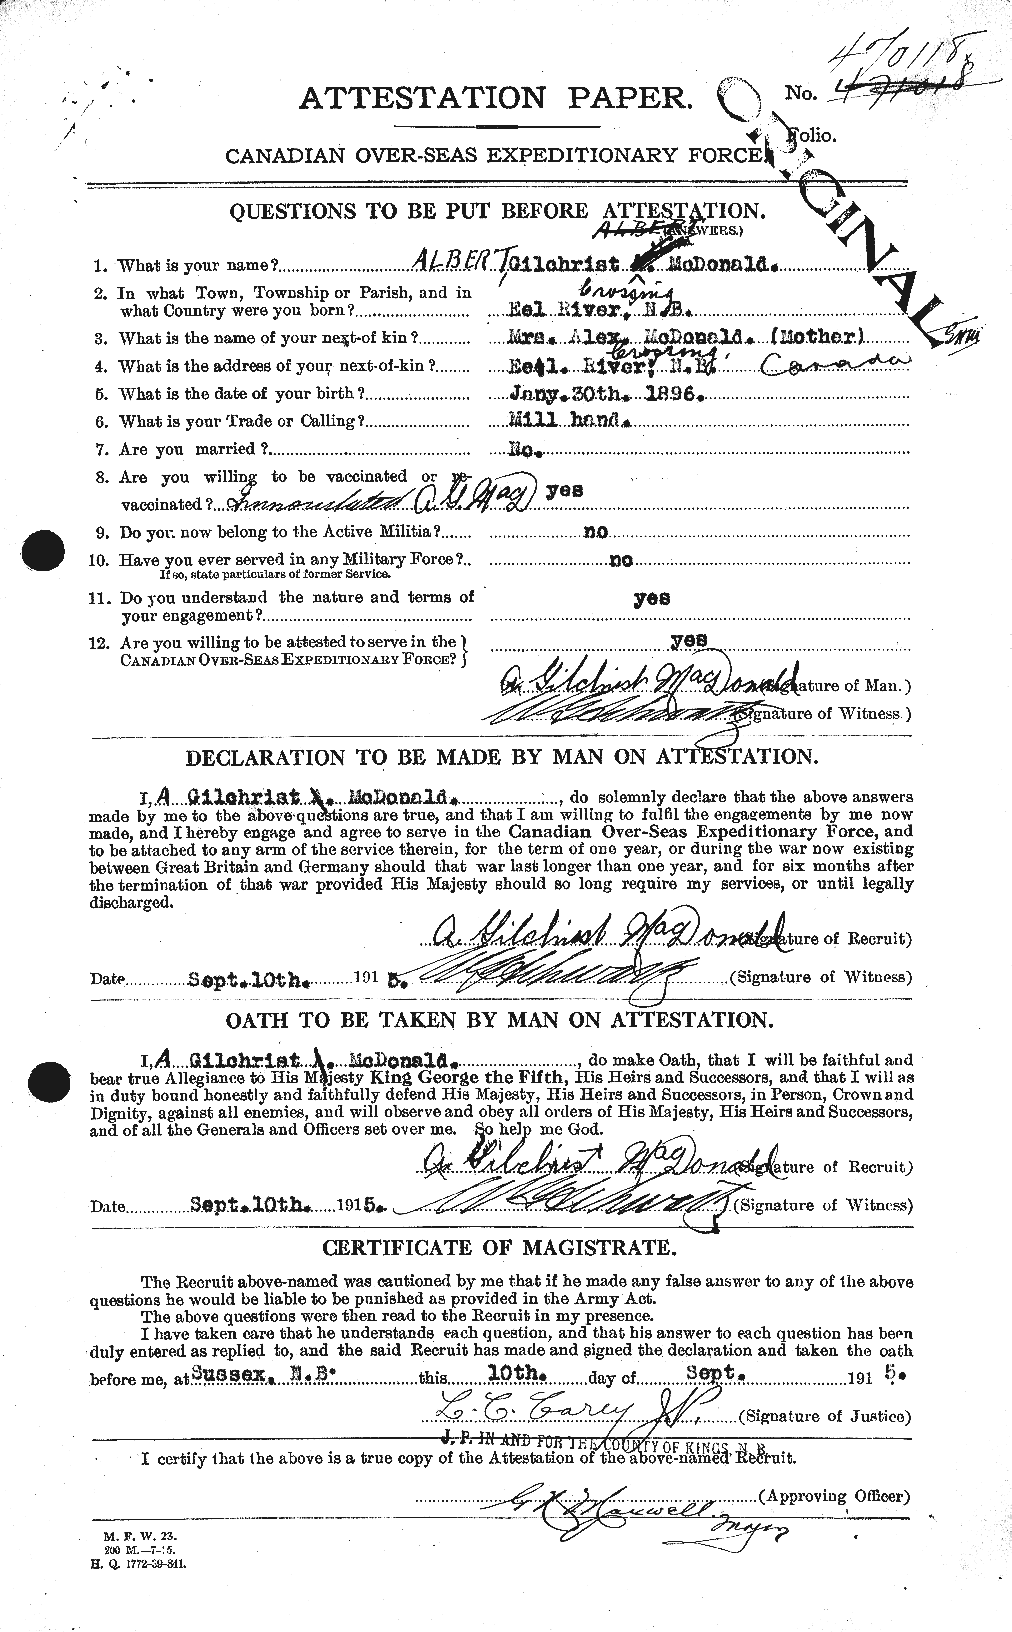 Personnel Records of the First World War - CEF 519263a